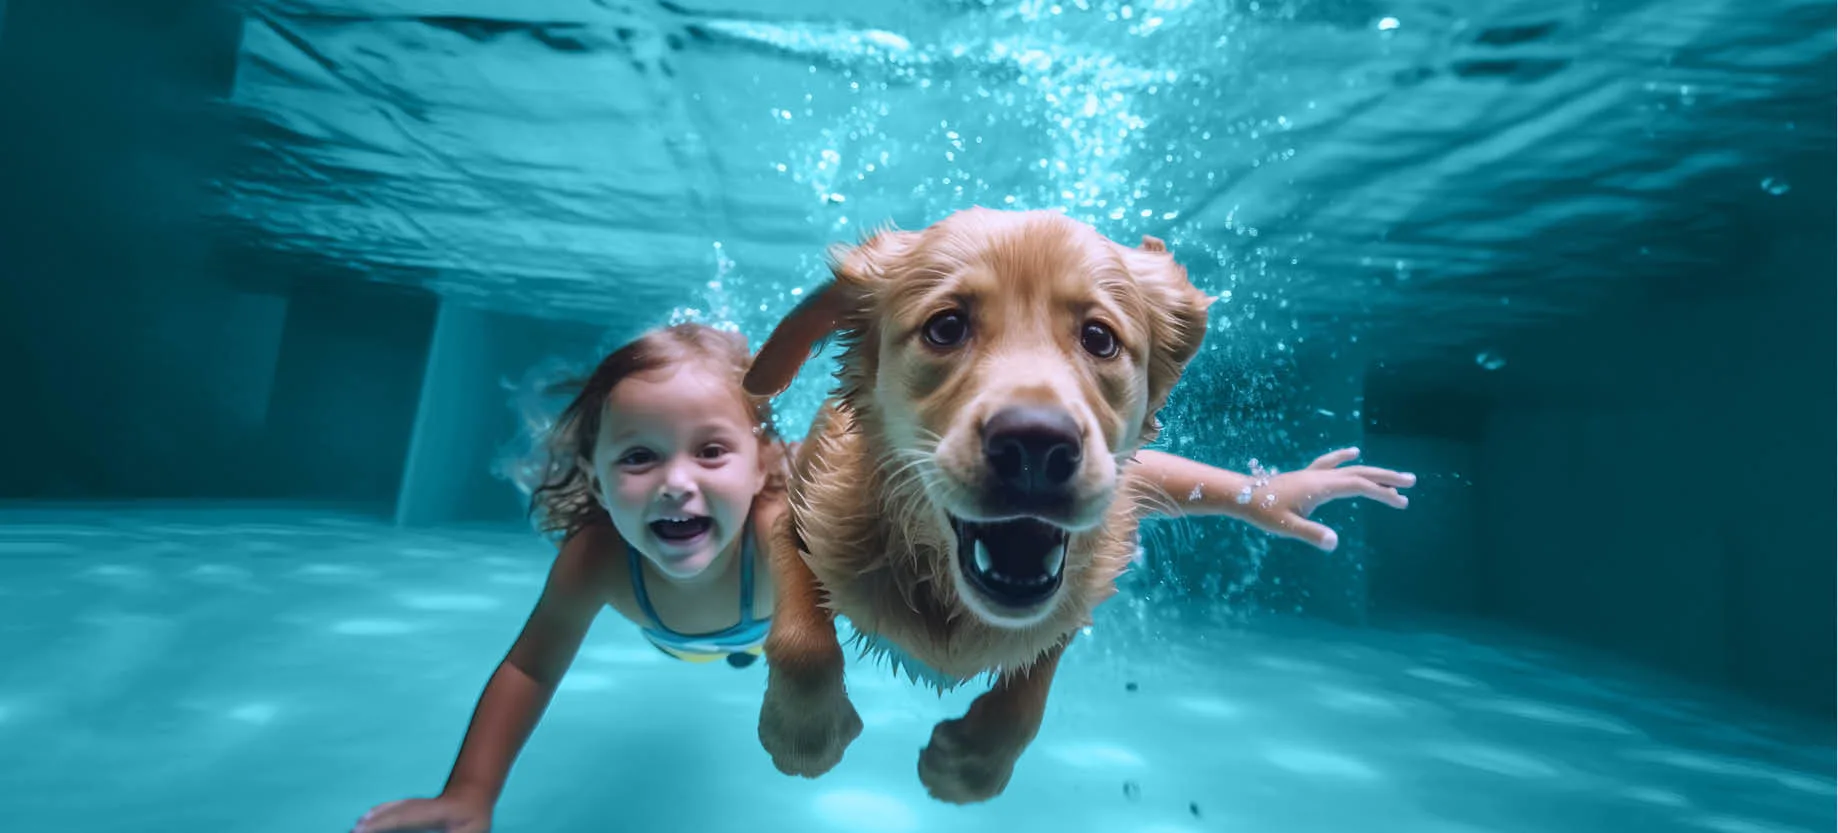 underwater dog and girl